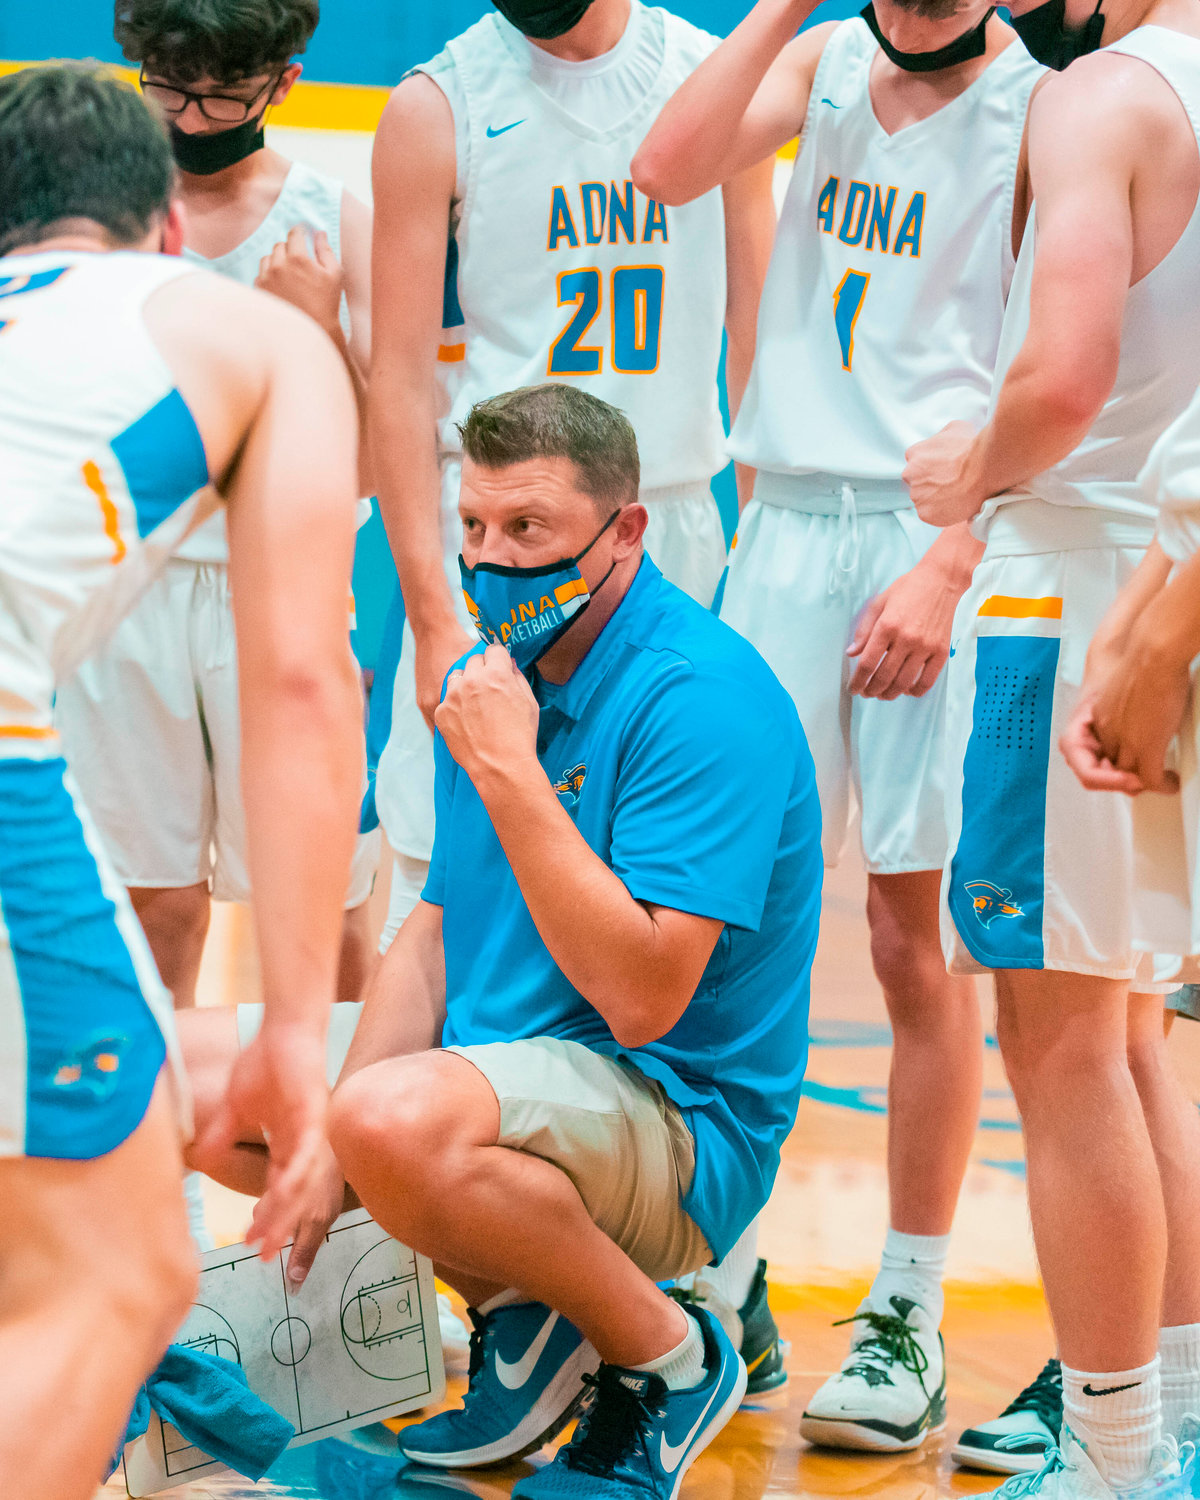 Adna’s Head Coach Luke Salme talks to players during a game on Friday.